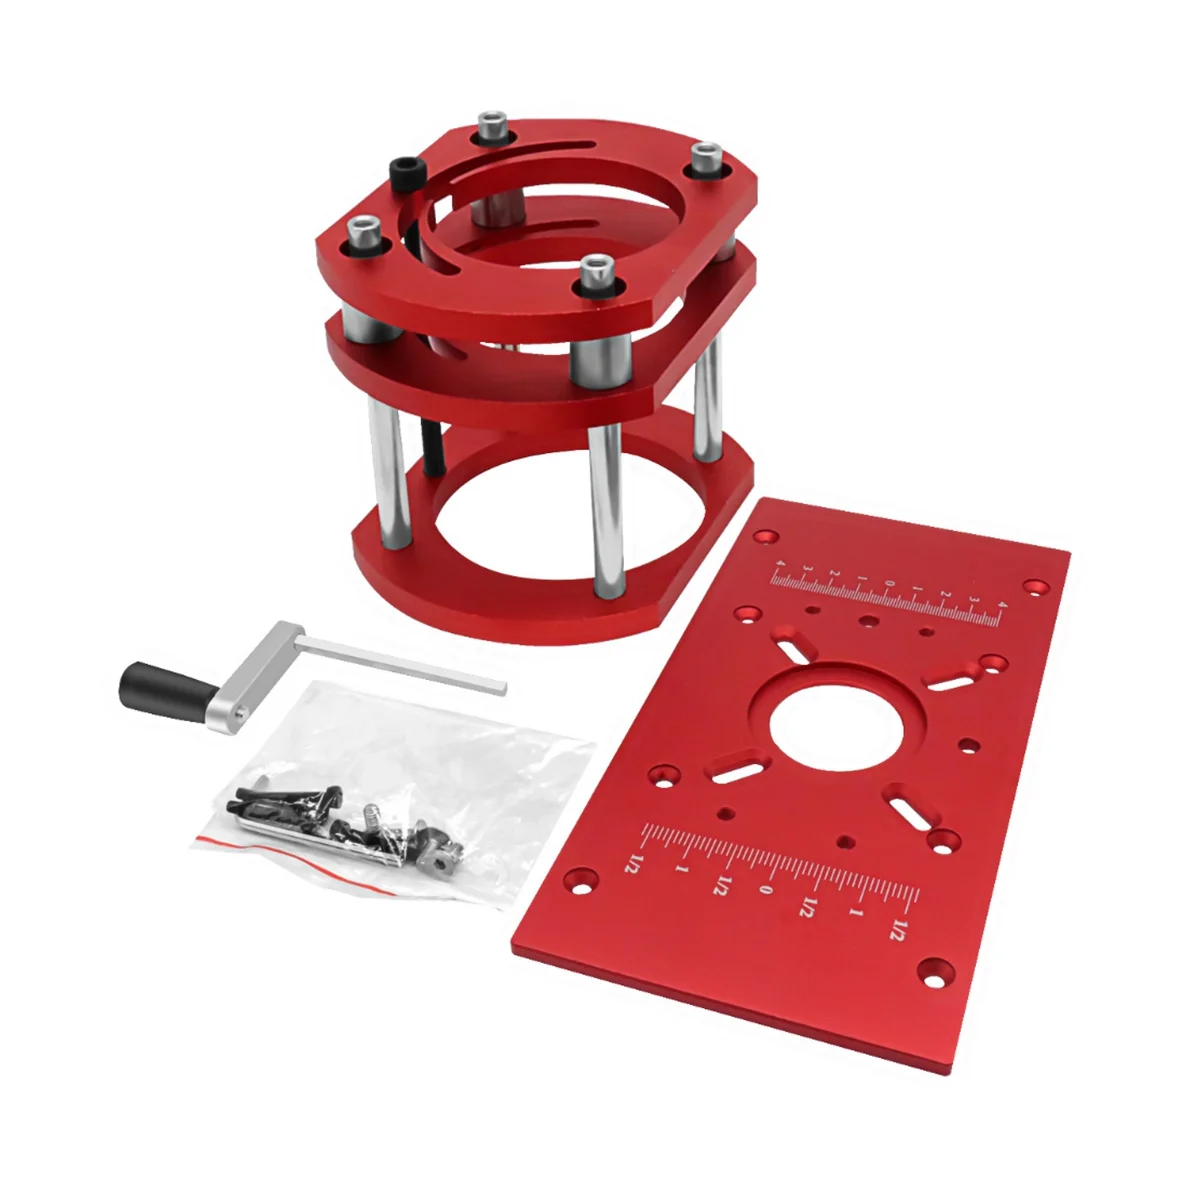 

Router Lift with Fixed Base-Router Insert Plate-Woodworking Universal Router Lift Base for 65mm Dia Router Motor-Red